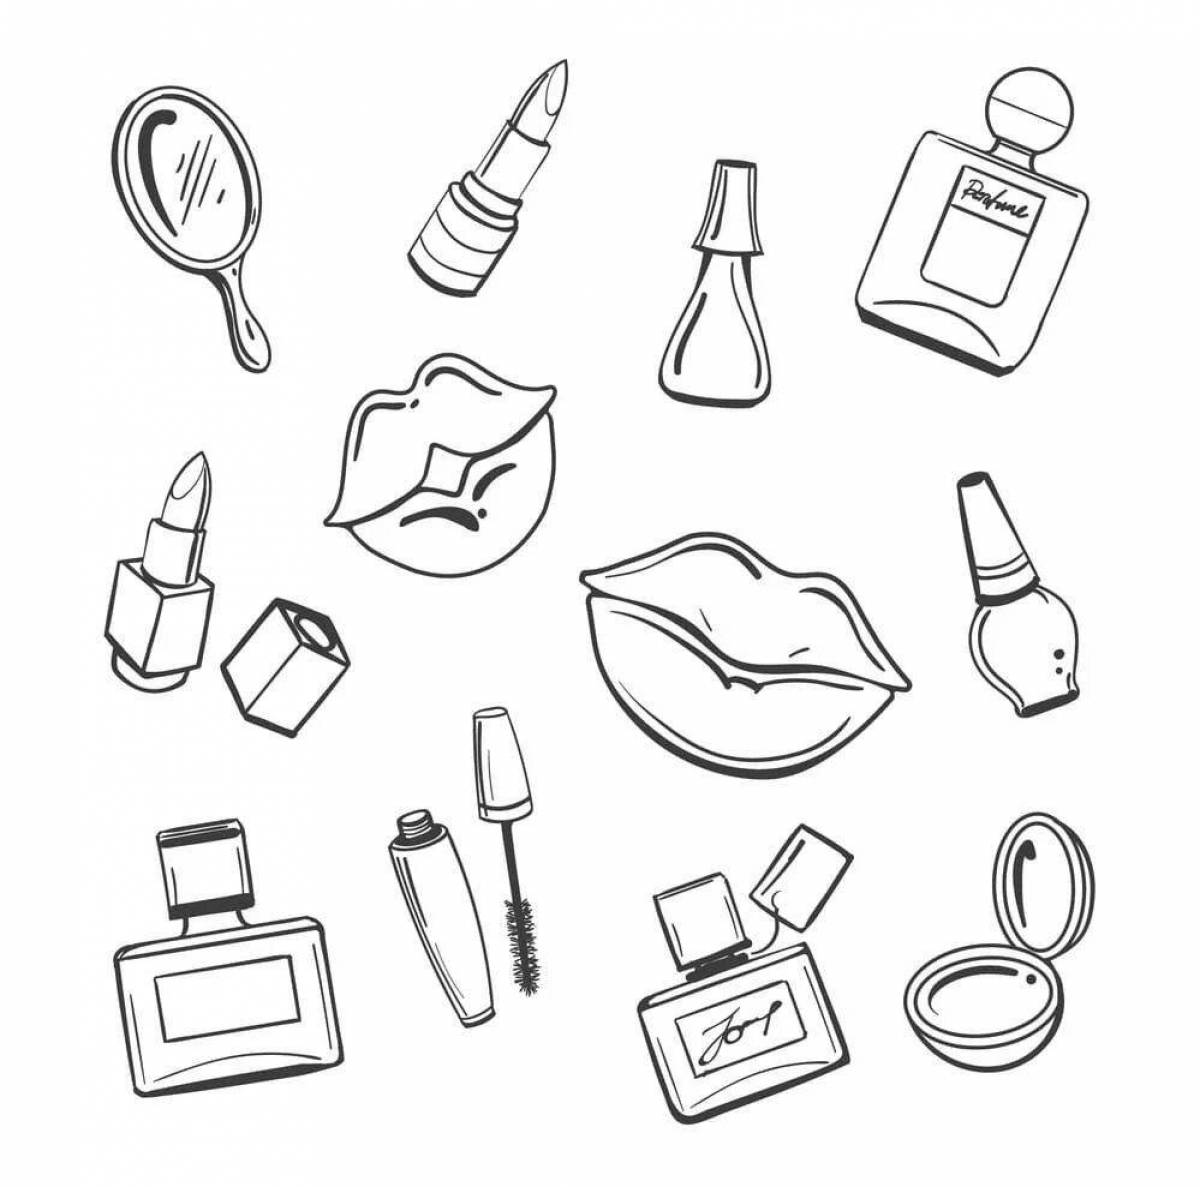 Coloring page with spectacular cosmetics